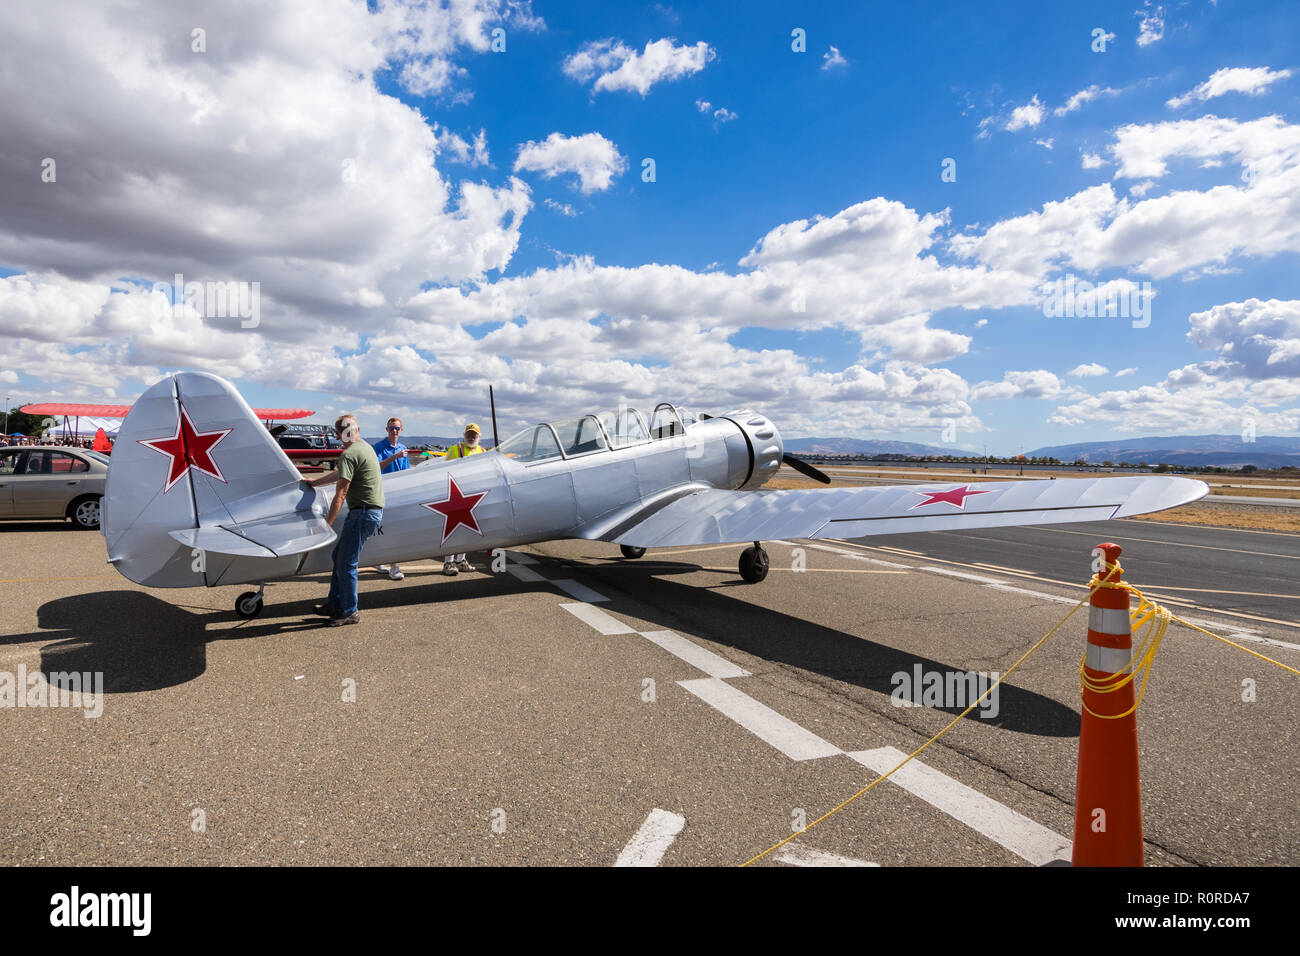 October 6, 2018 Livermore / CA / USA - Aircraft on display at the Livermore Municipal Airport Open House event Stock Photo